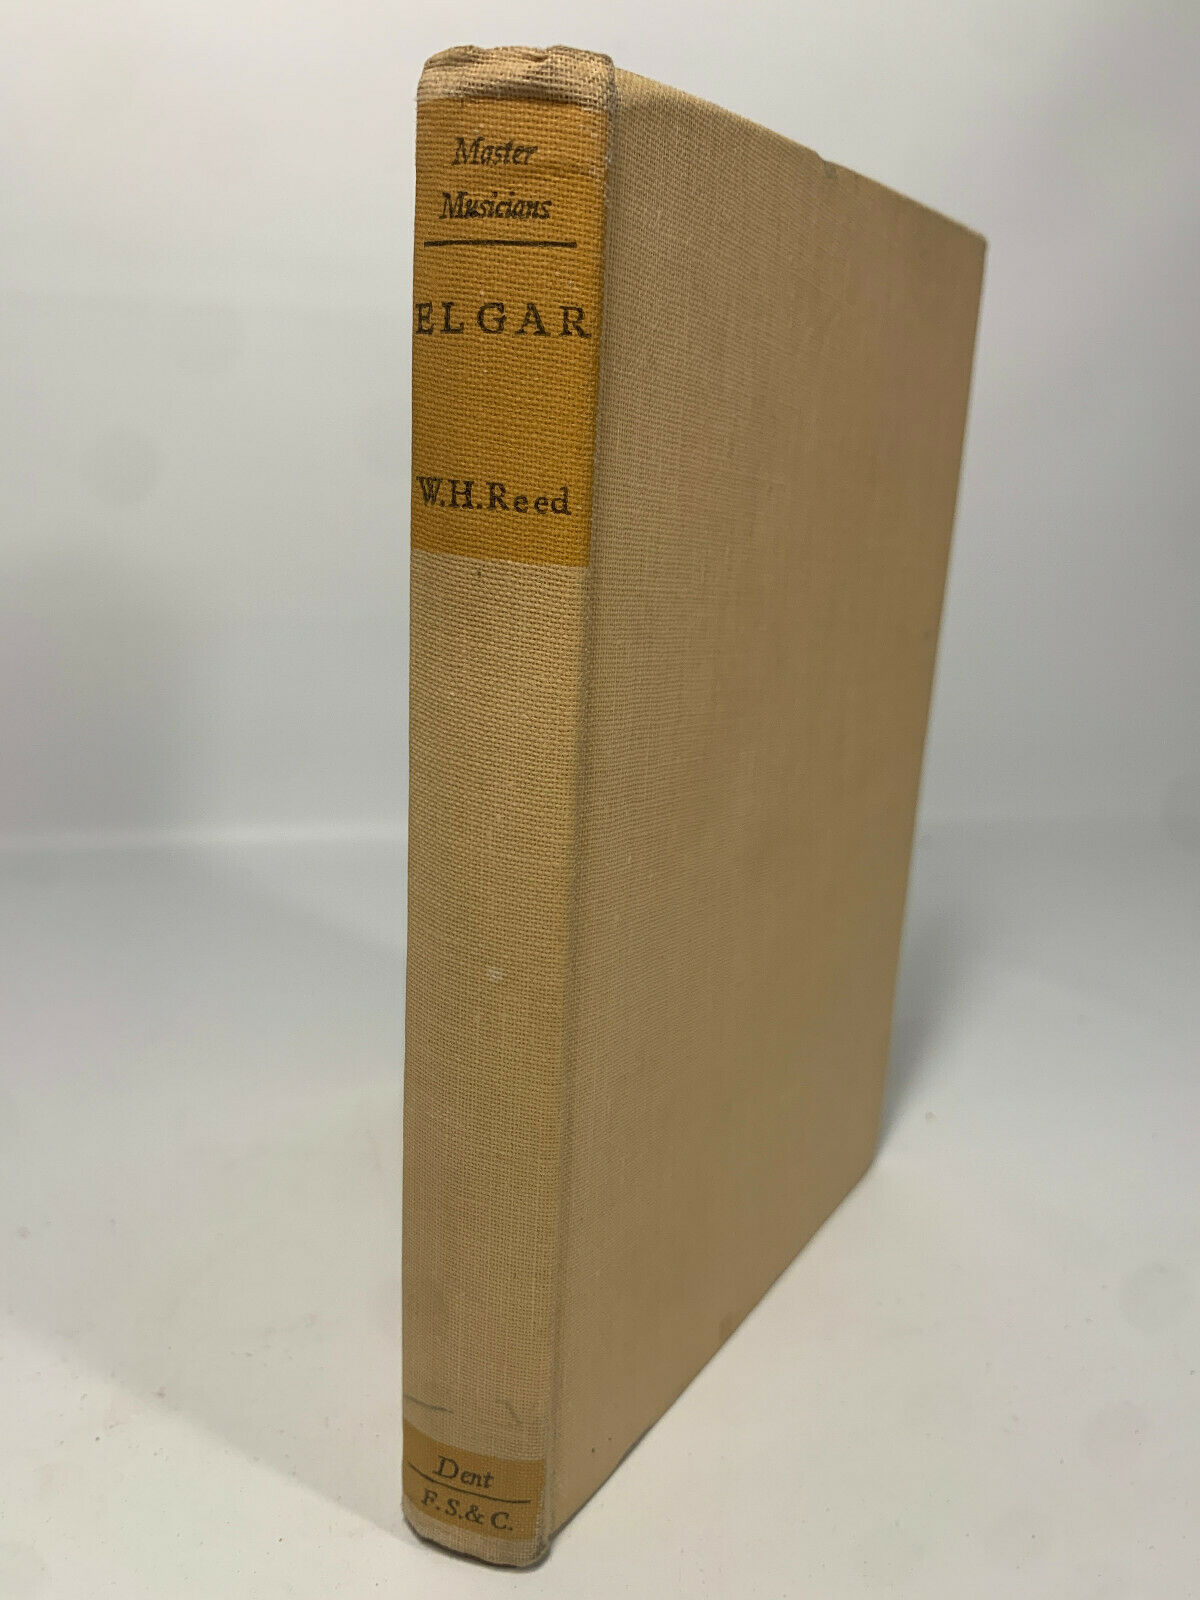 Elgar by W.H. Reed, The Master Musicians, Illustrated 1949